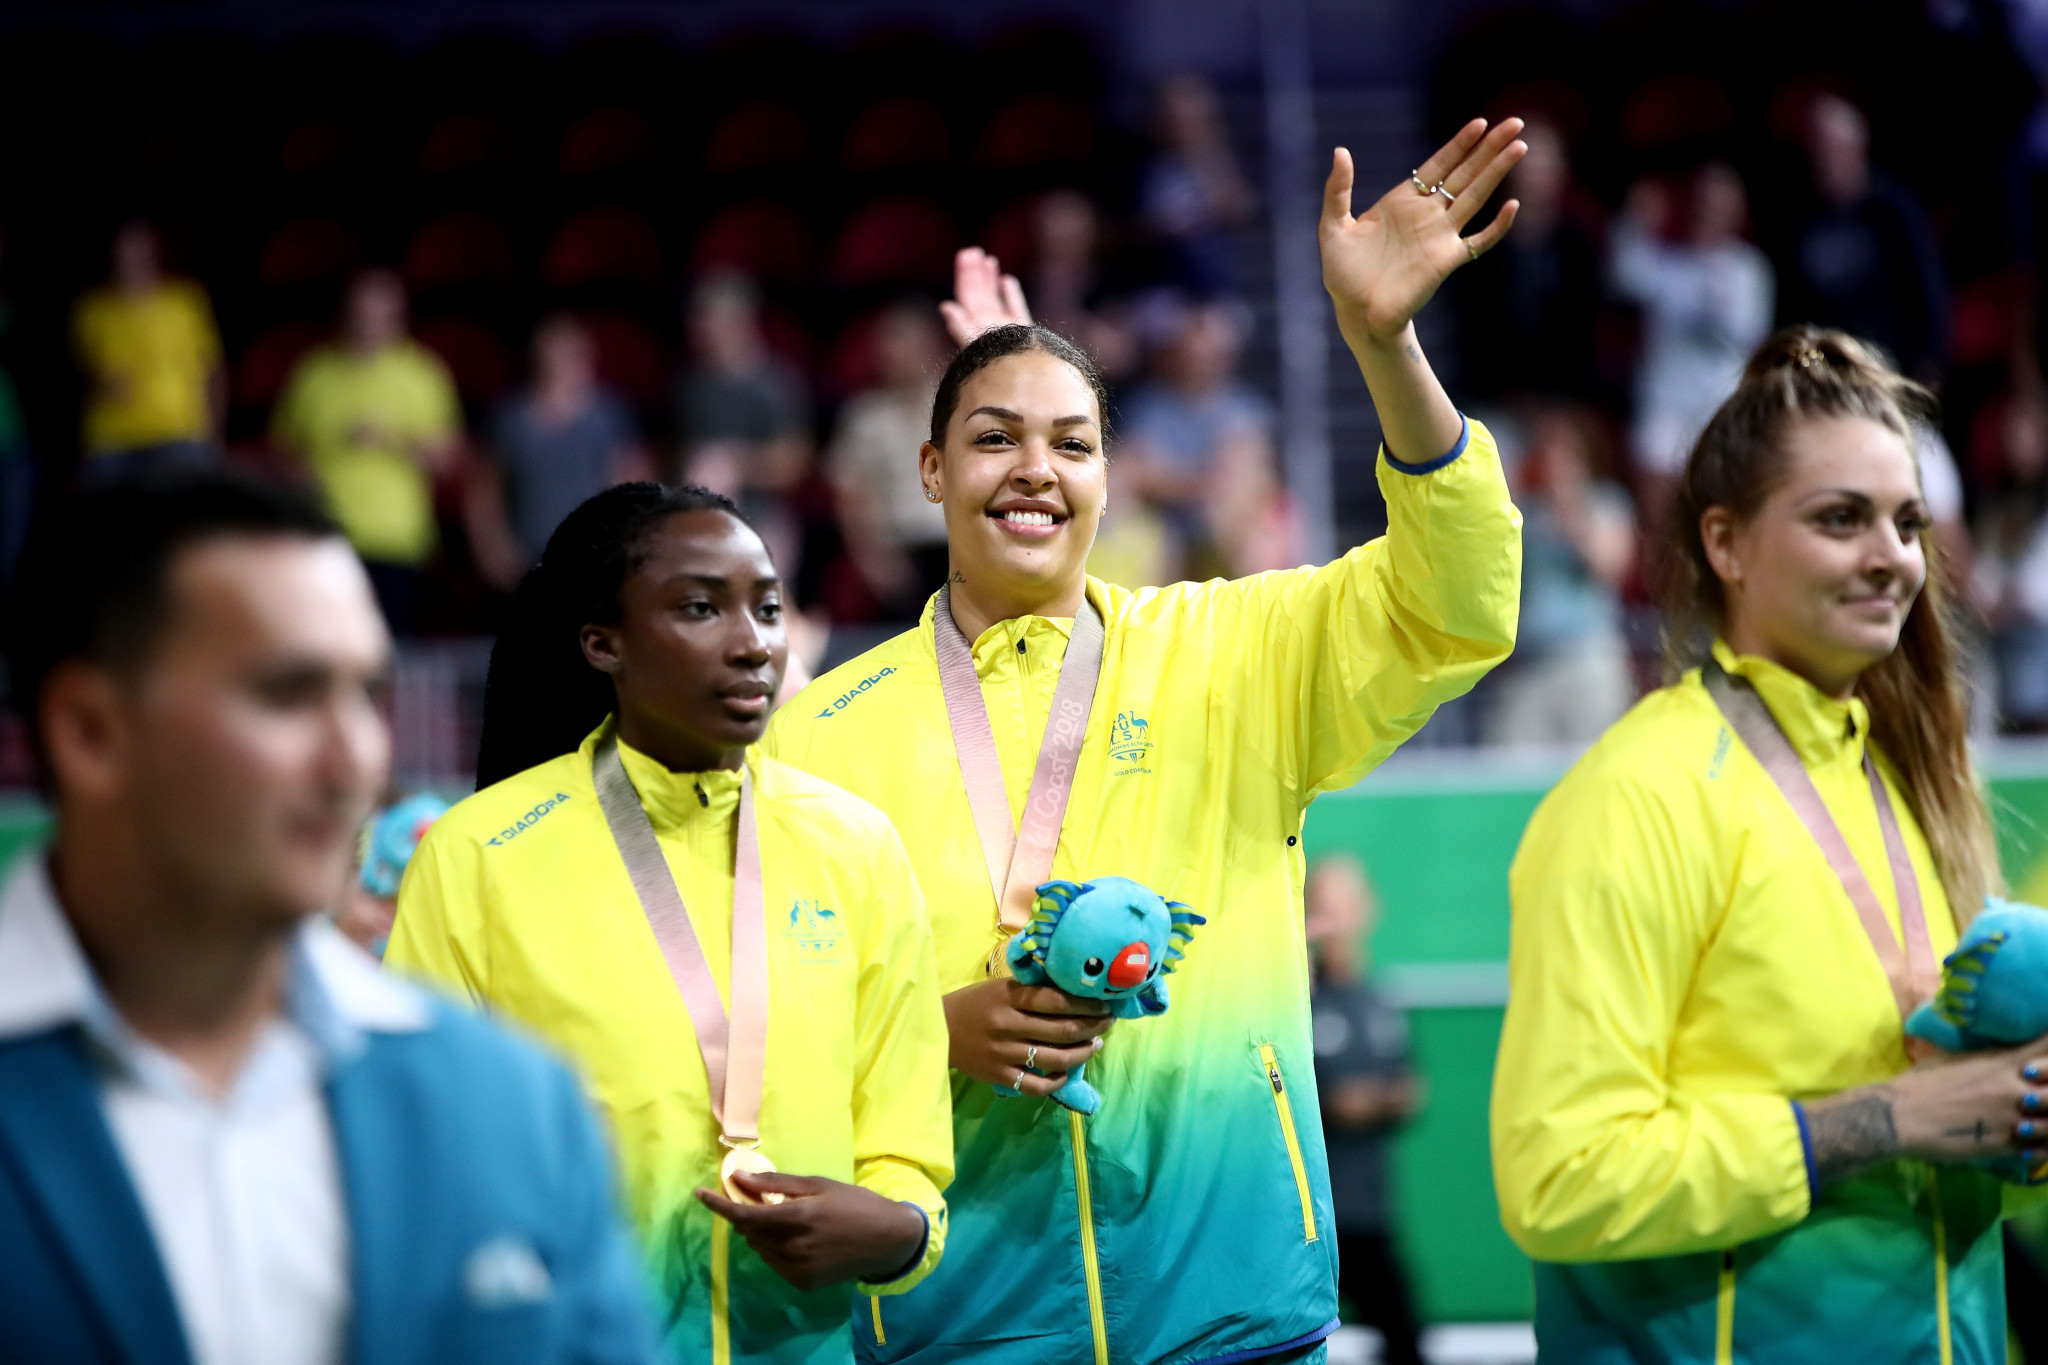 Liz Cambage scored more points than any other player at the Gold Coast 2018 Commonwealth Games as Australia won the gold medal ©Getty Images